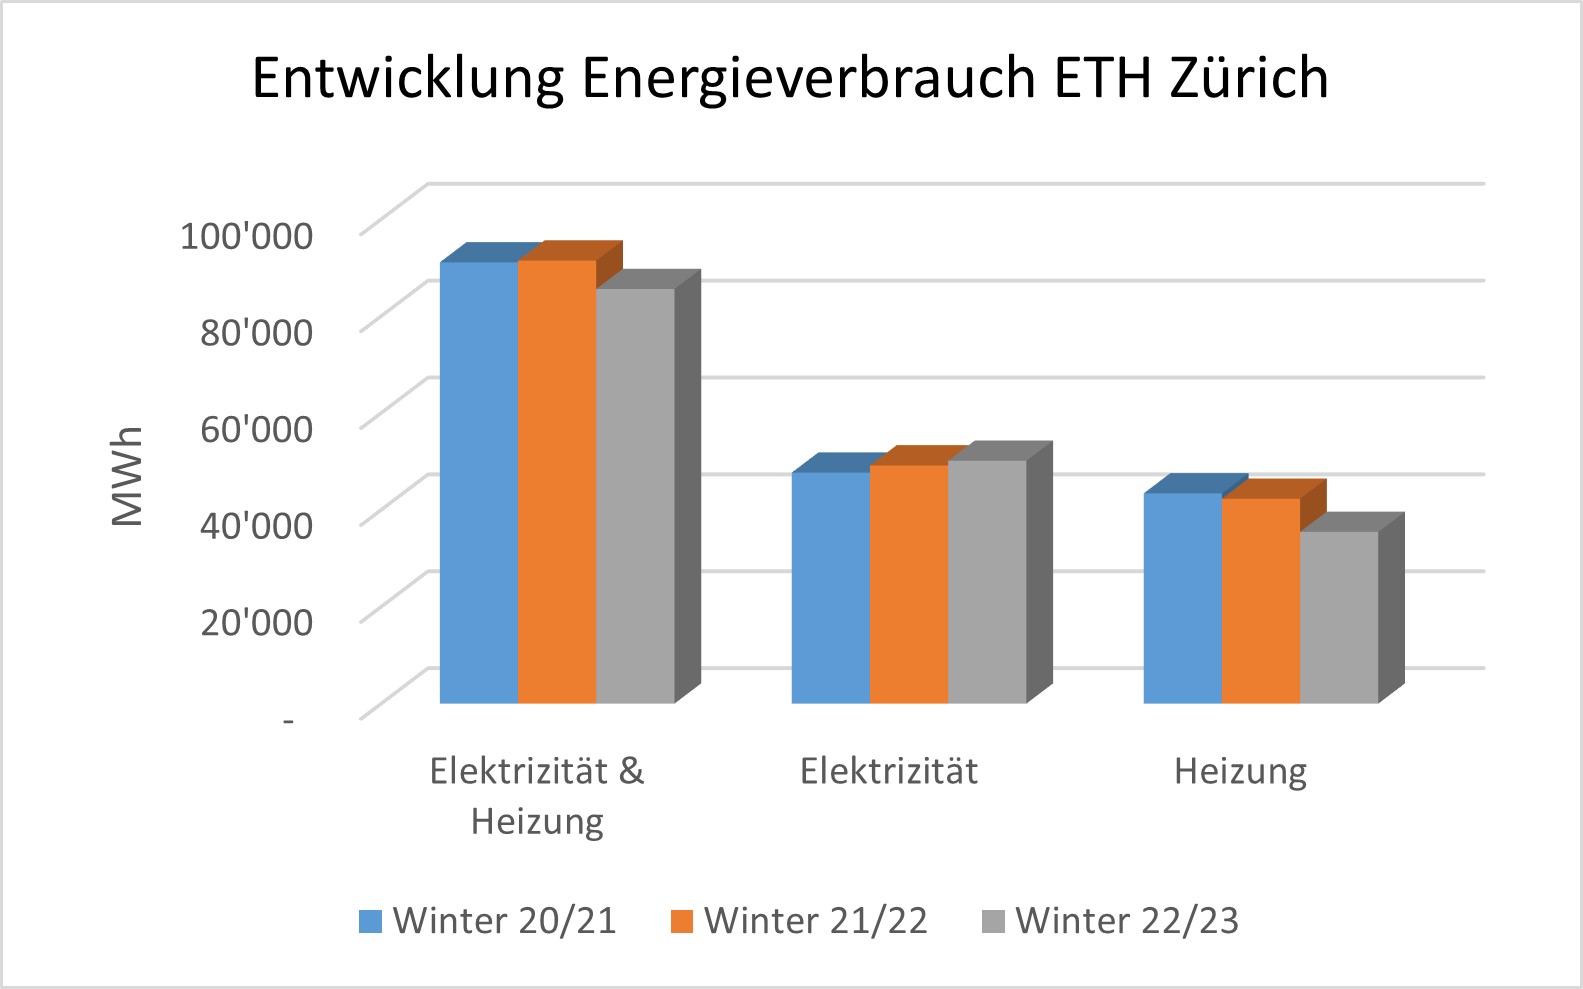 Enlarged view: Graph showing the development of energy consumption at ETH Zurich